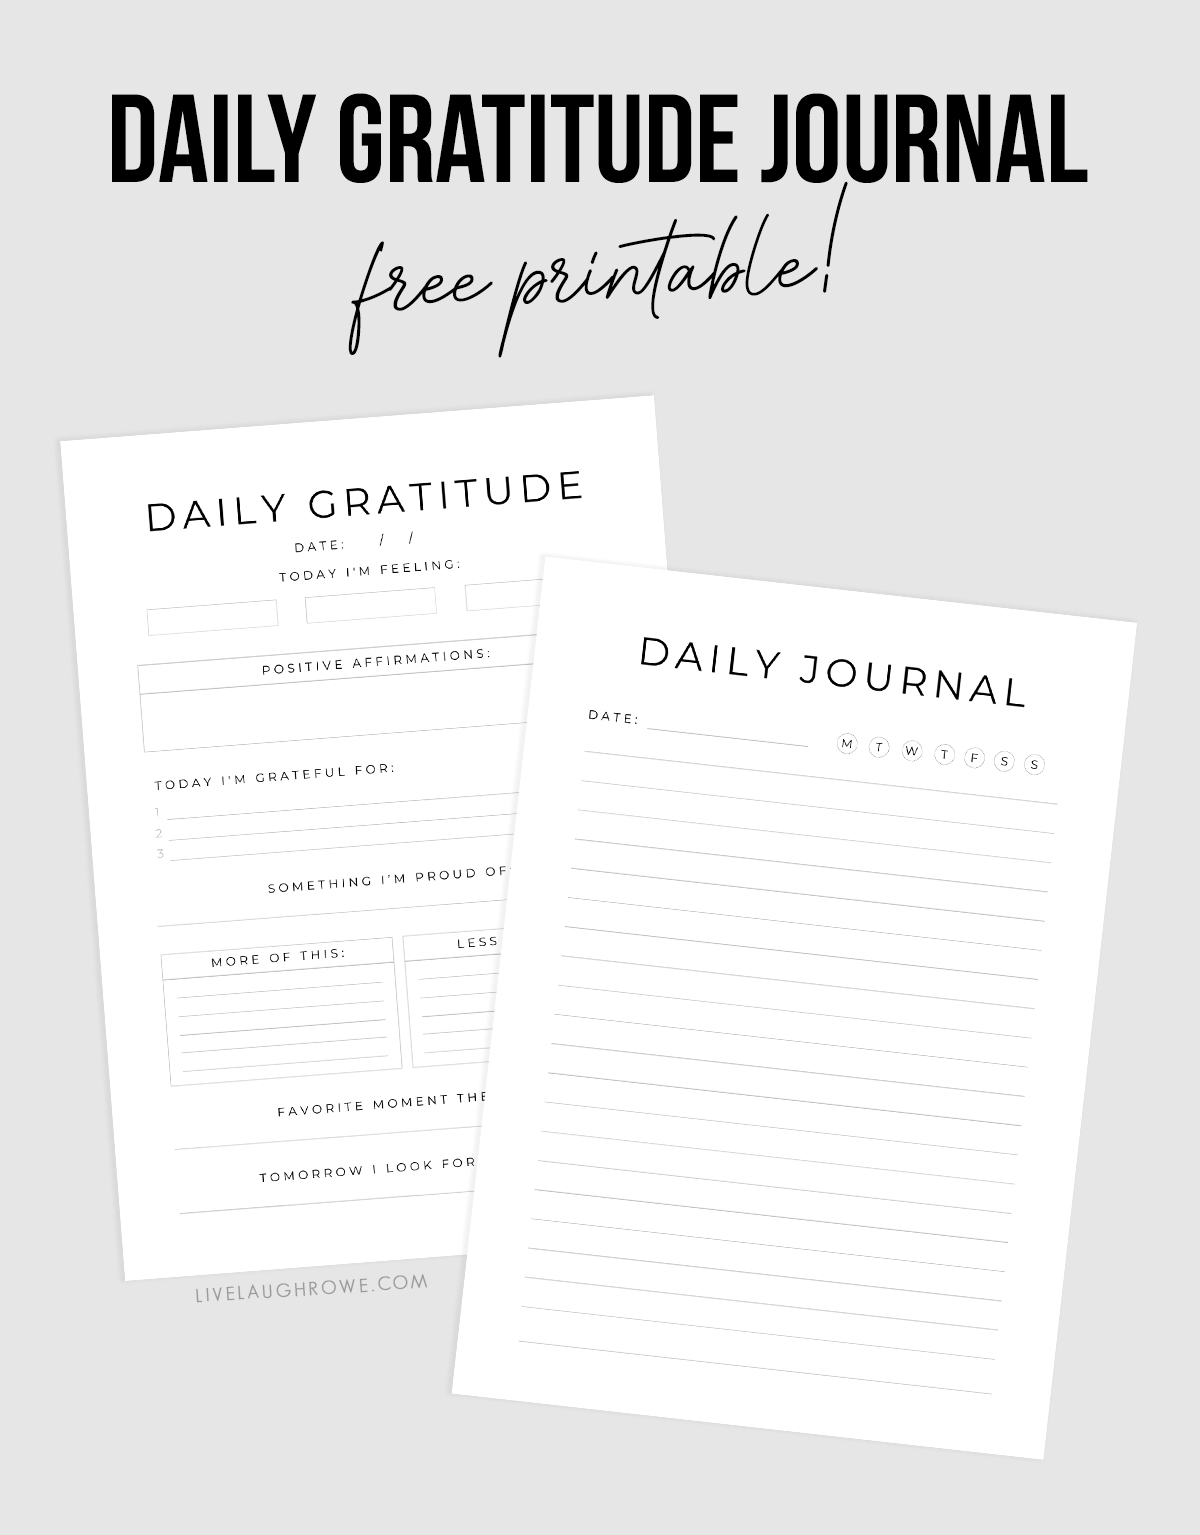 Practicing Gratitude with a Daily Gratitude Journal